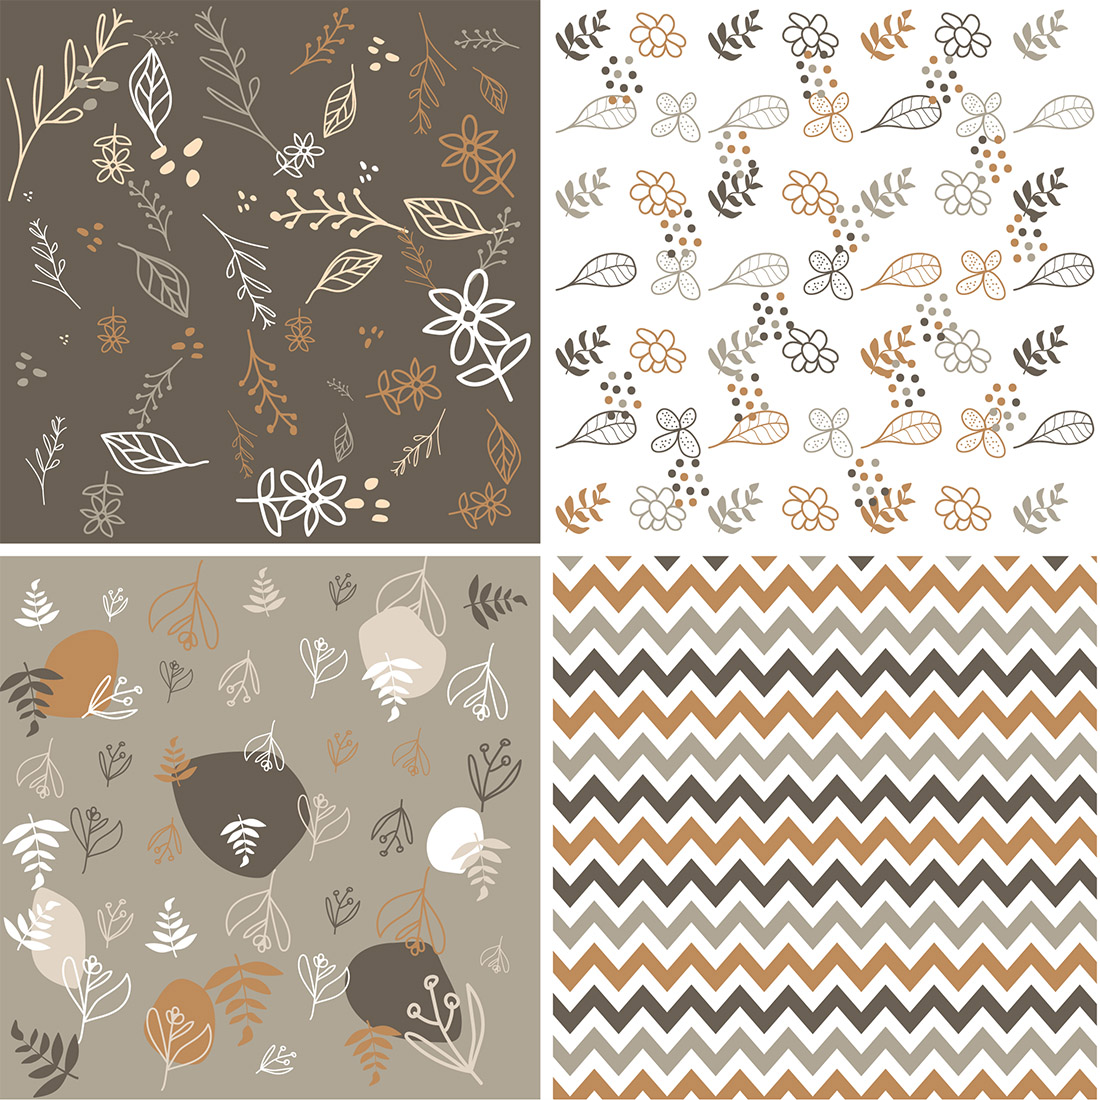 8 styles of different digital paper pattern preview image.